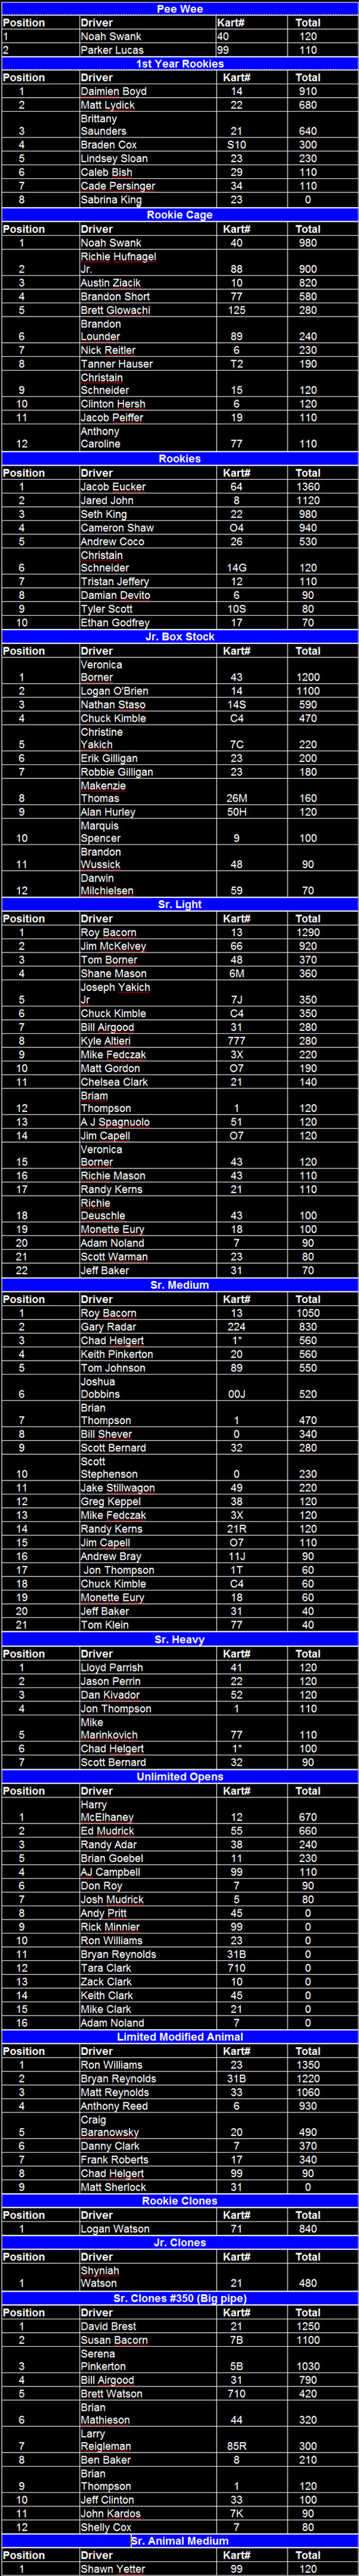 Naugle Speedway 2010 Final Point Standings